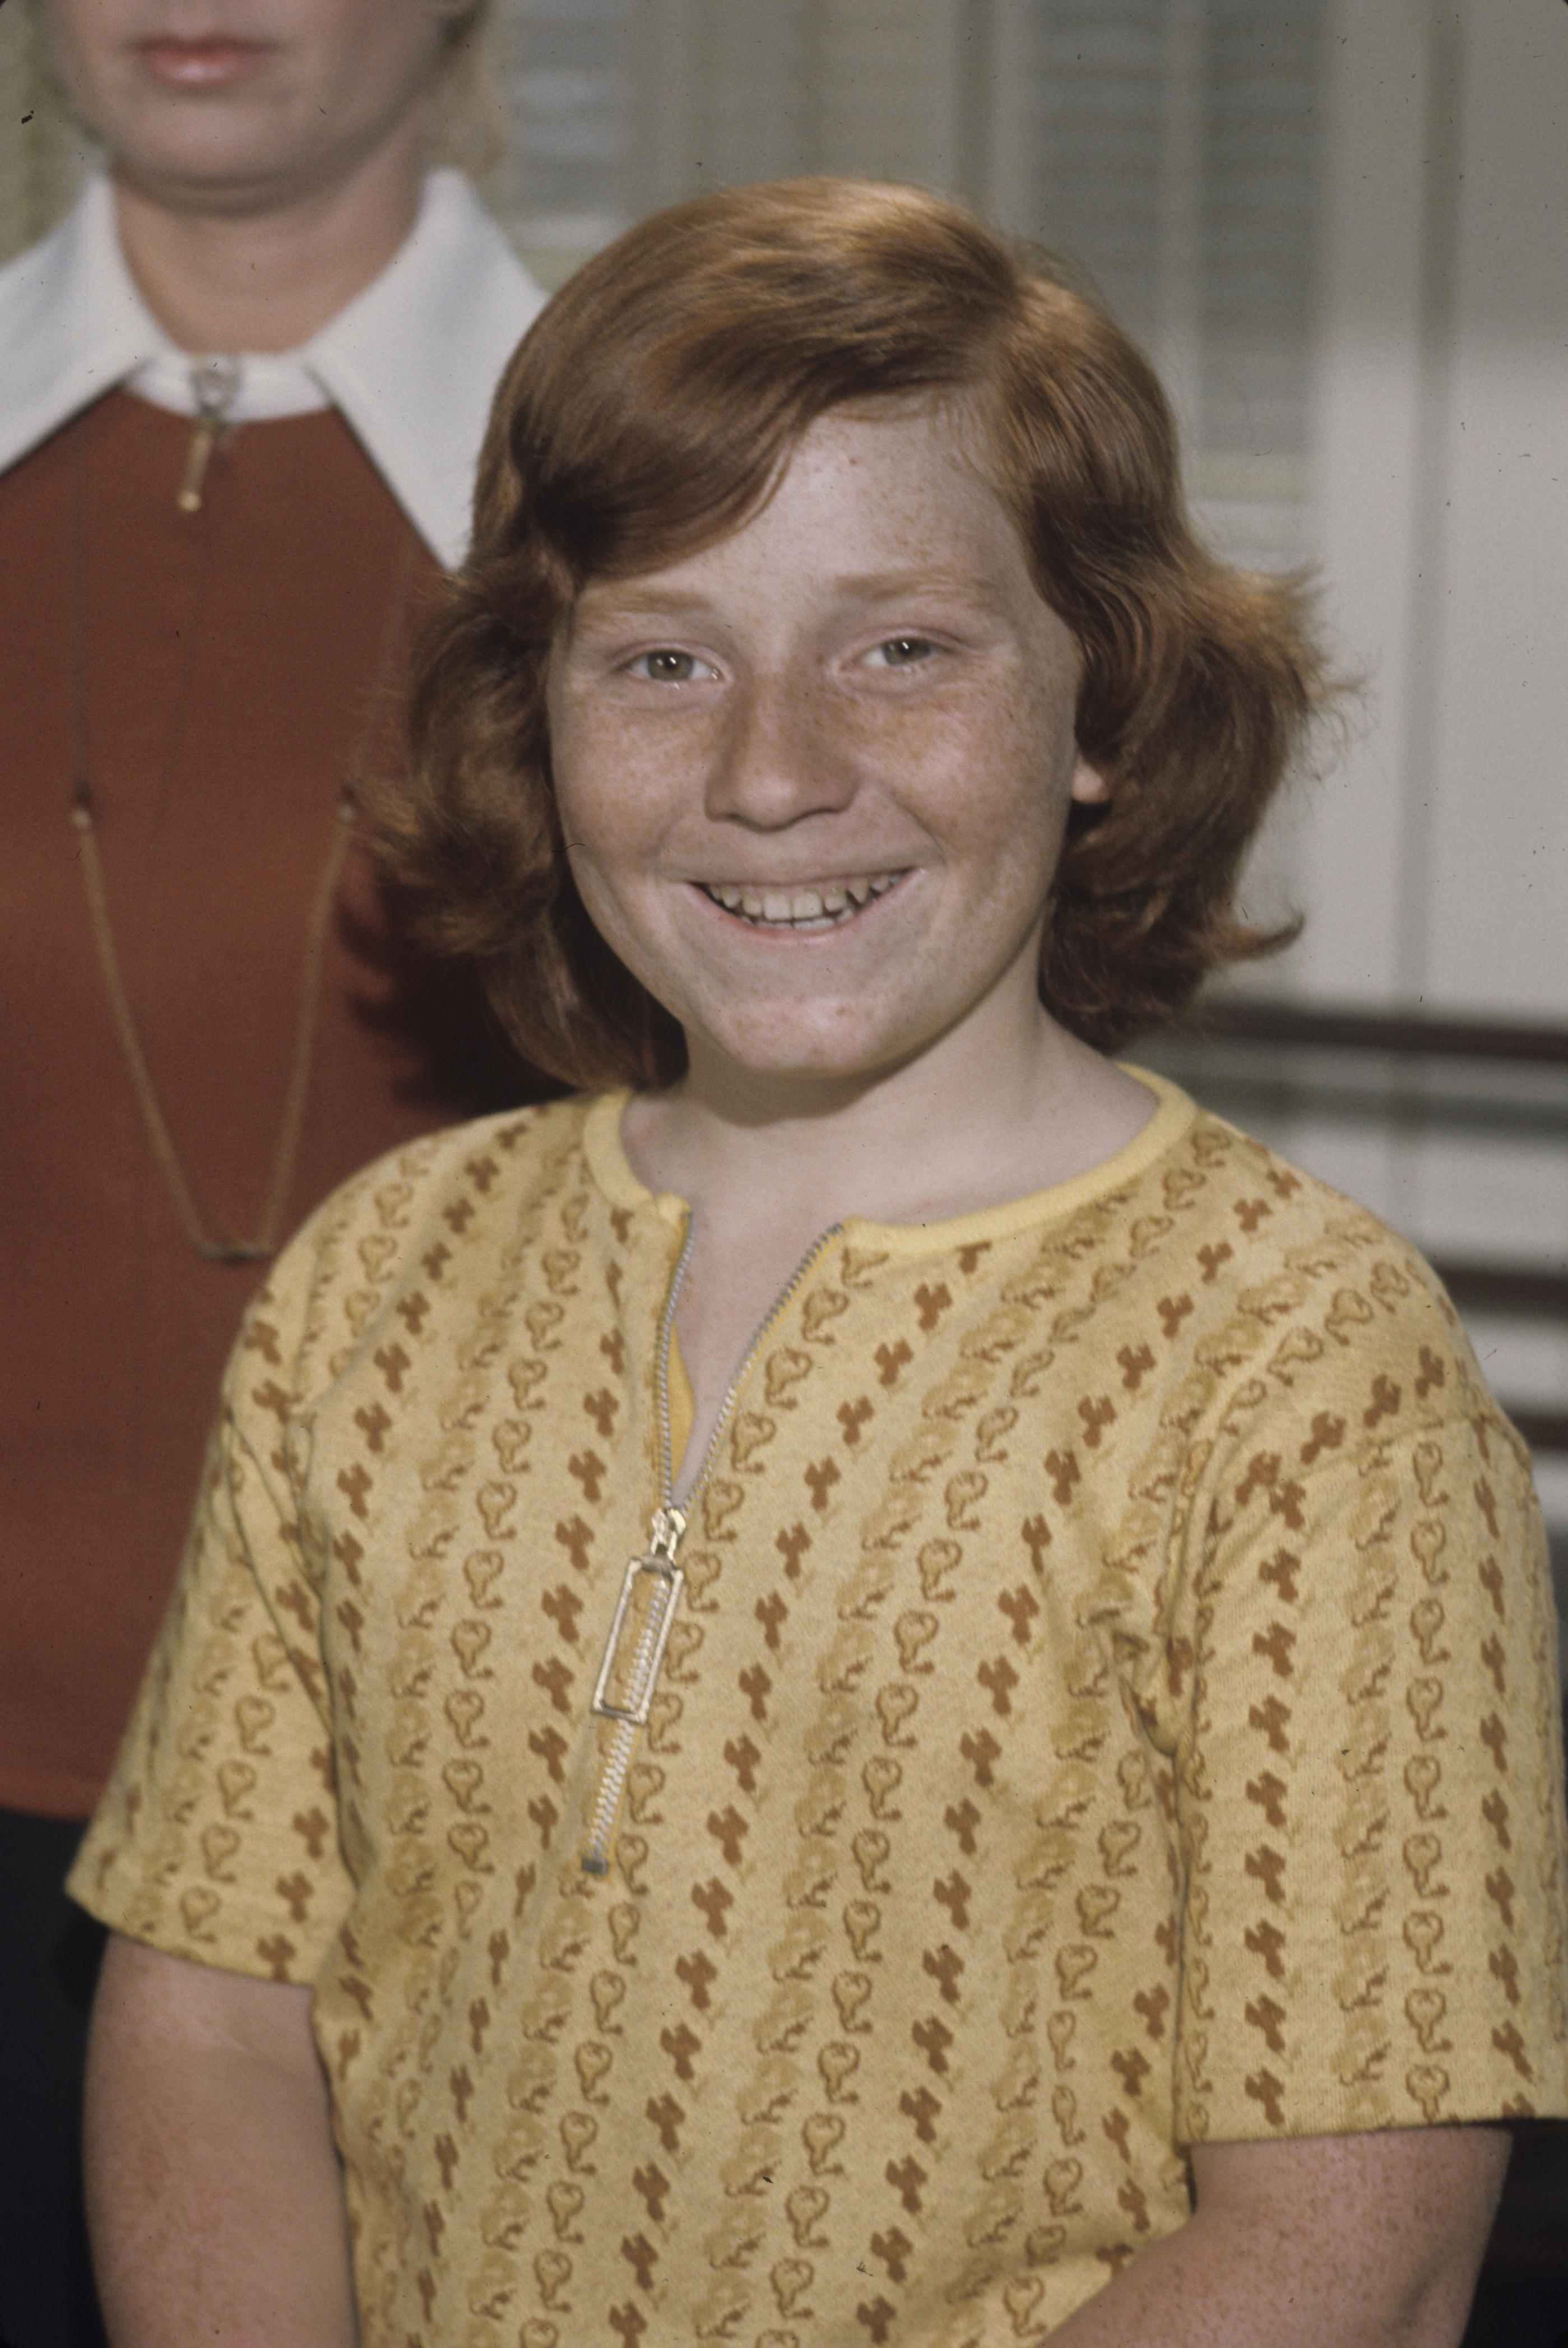 Actor Danny Bonaduce in 1973 for the television series, "The Partridge Family." | Source: Getty Images